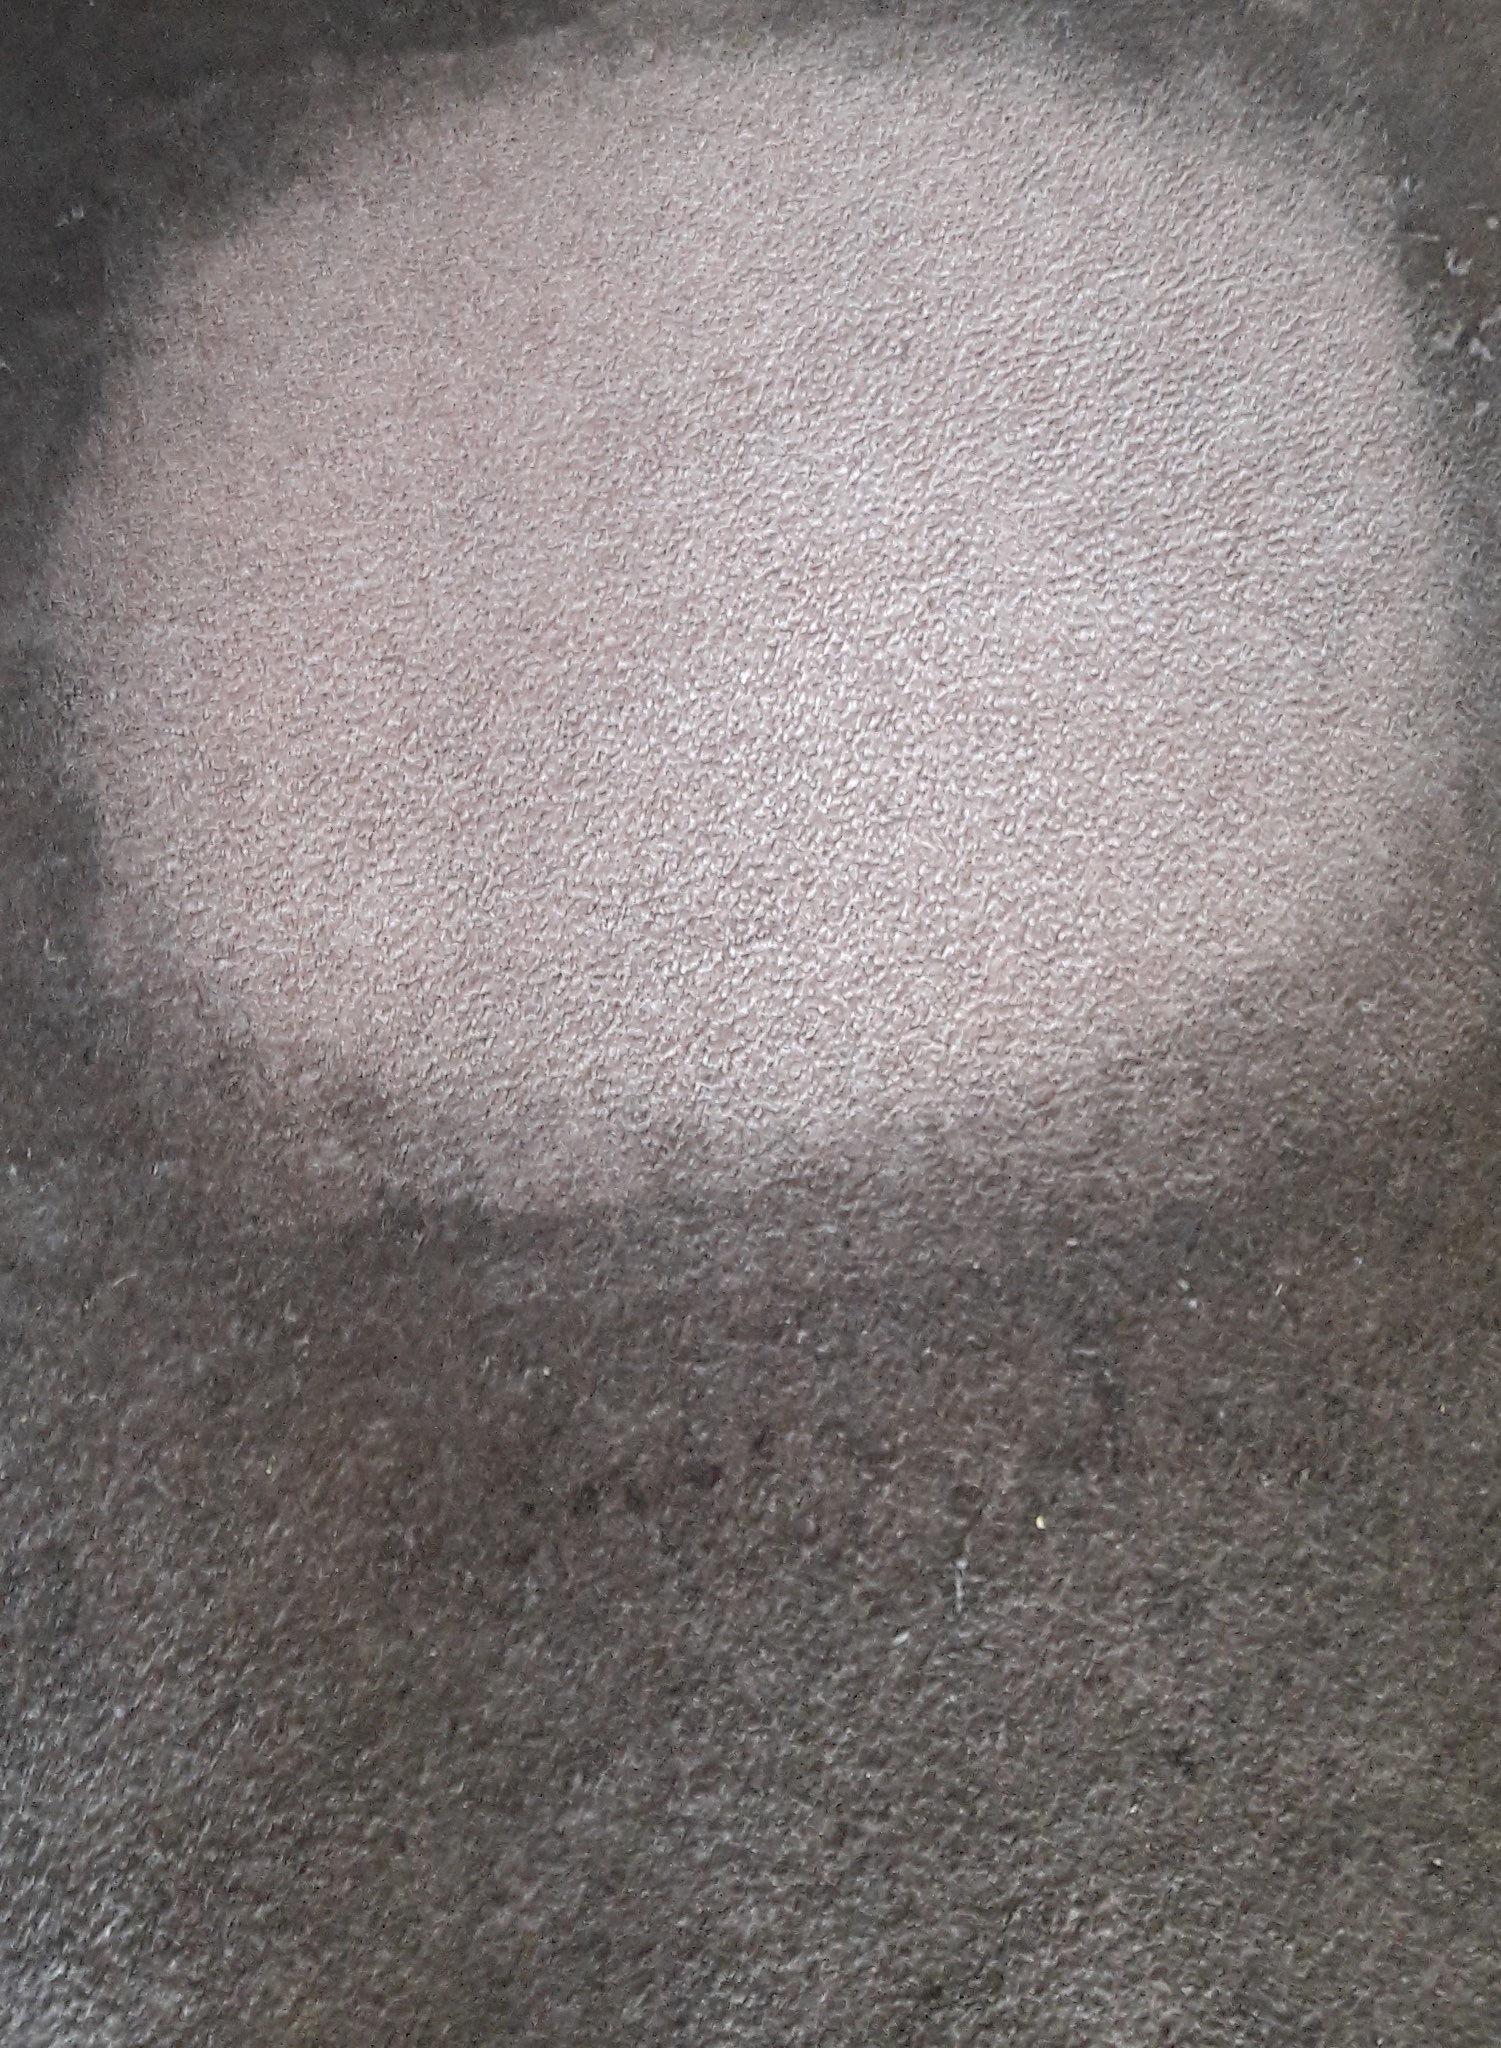 3D Carpet Cleaning and Restoration Photo